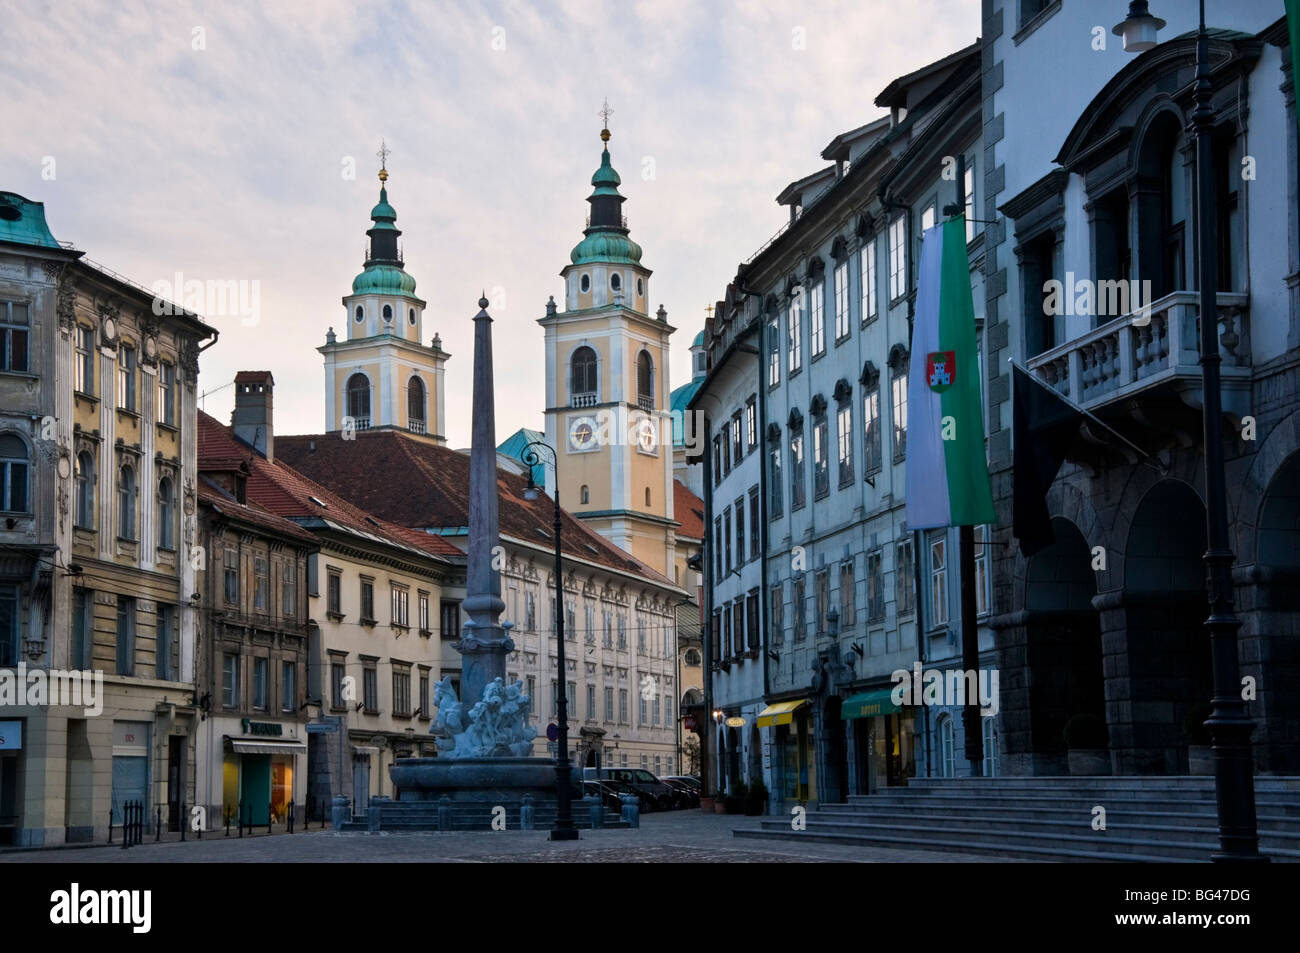 View towards the Cathedral of St. Nicholas along the streets of the old town of Ljubljana, Slovenia, Europe Stock Photo